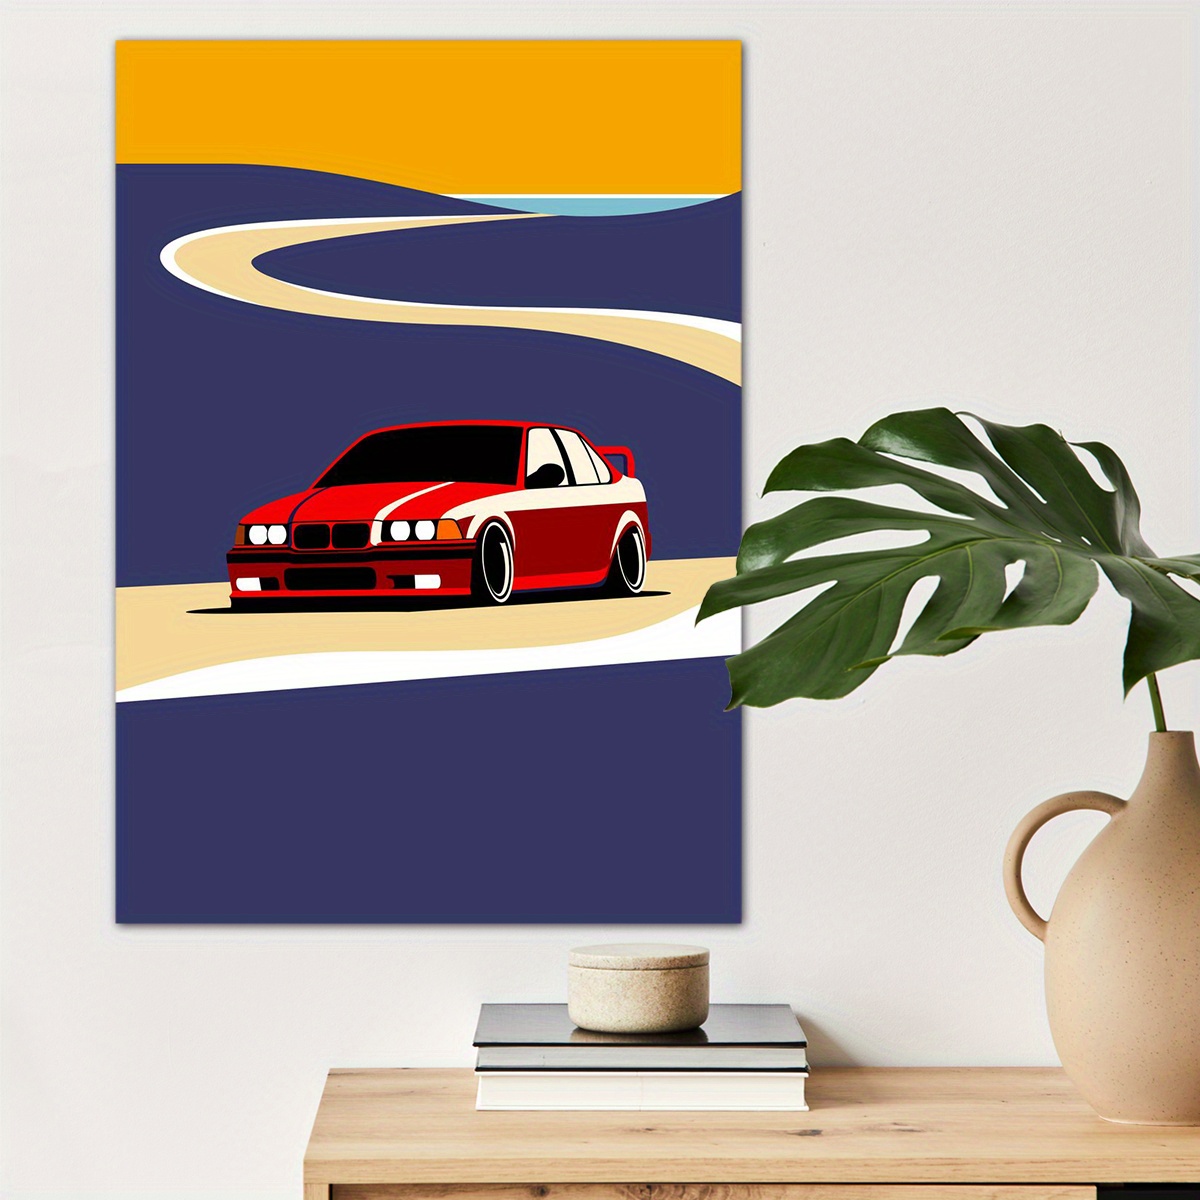 

1pc Minimalist Car Poster Canvas Wall Art For Home Decor, Car Lovers Poster Wall Decor Roadster Canvas Prints For Living Room Bedroom Kitchen Office Cafe Decor, Perfect Gift And Decoration